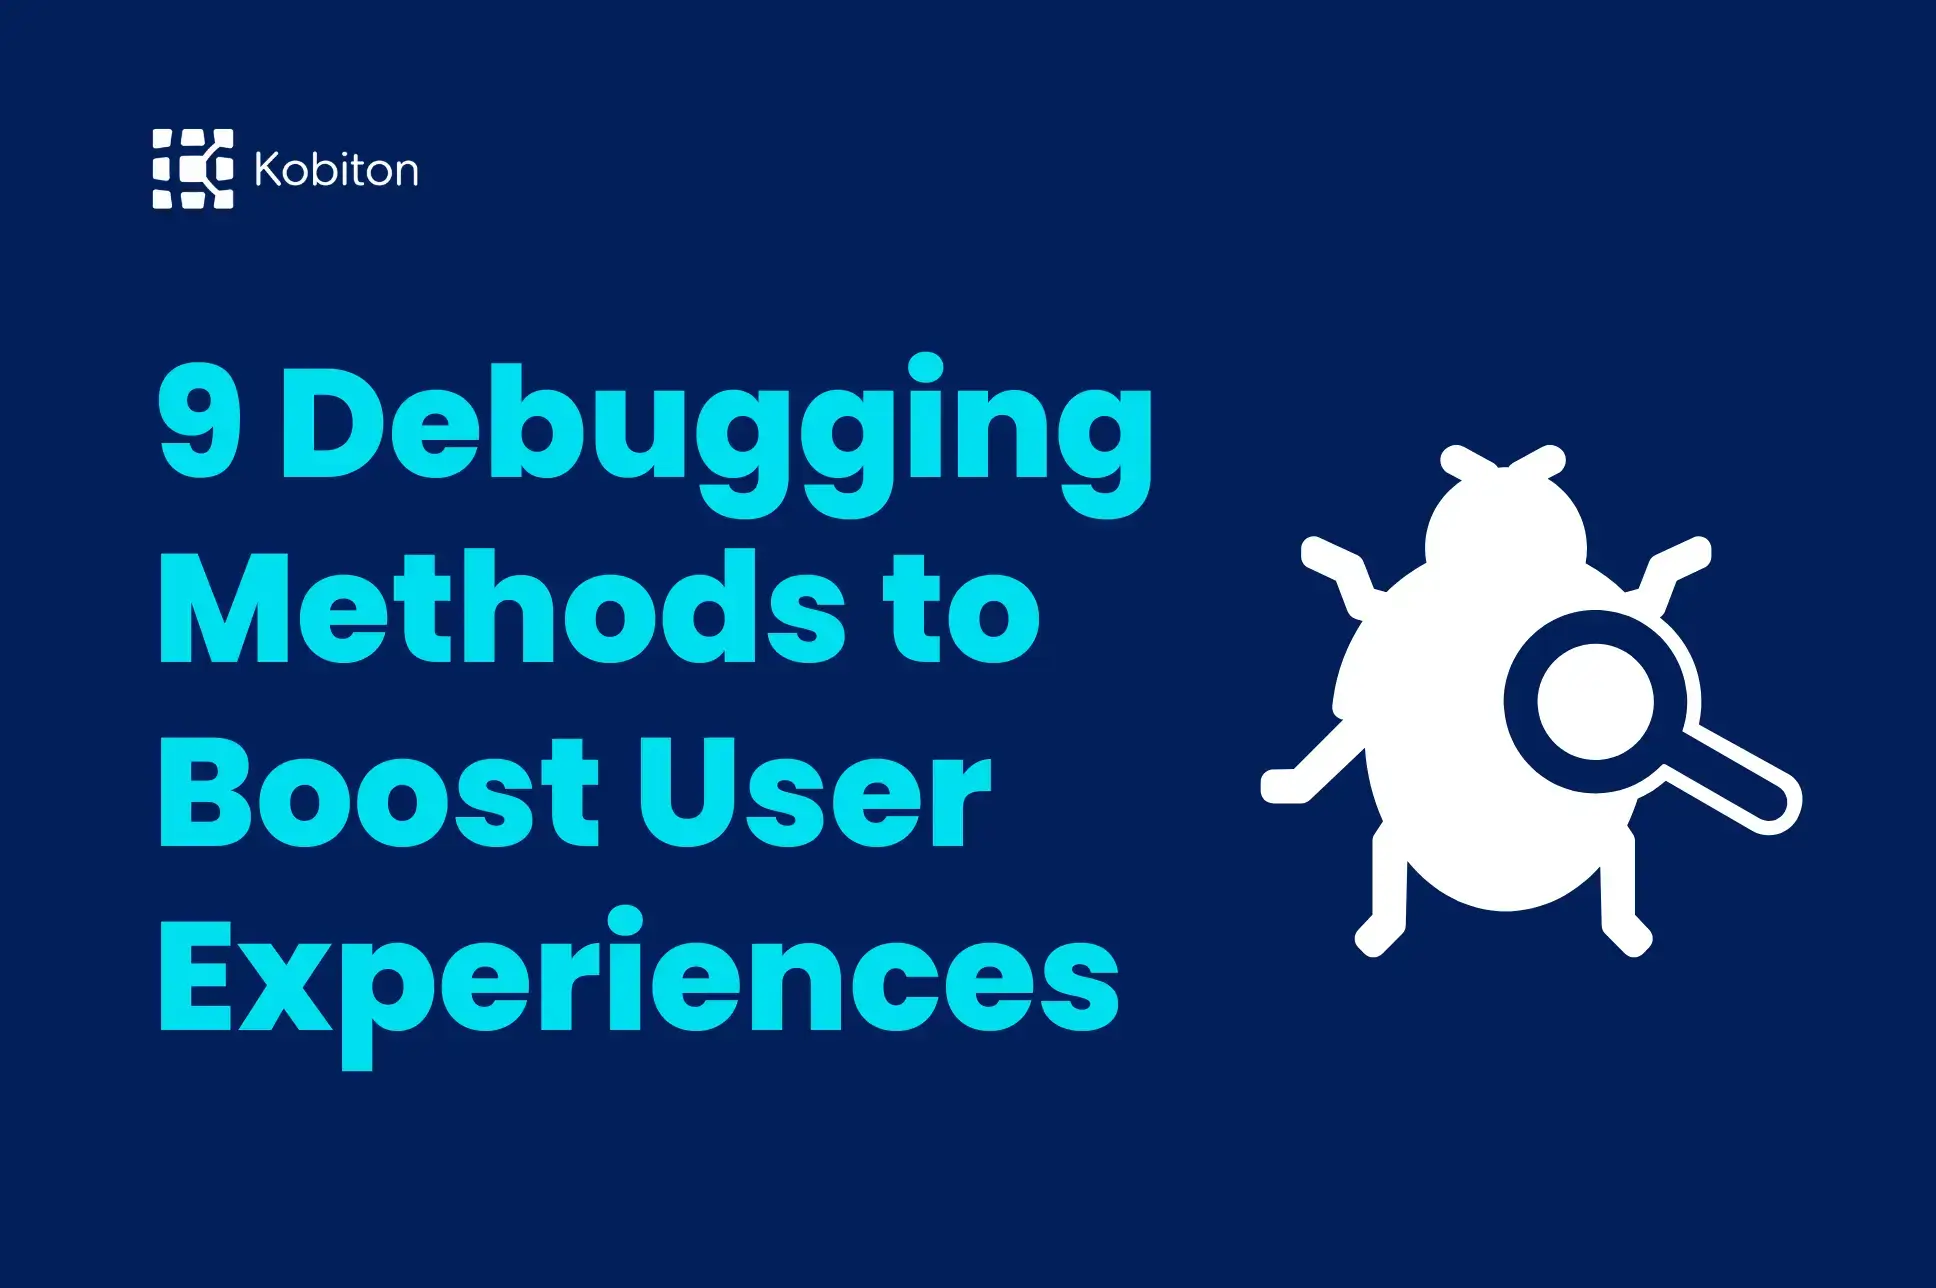 9 debugging methods to boost user experiences